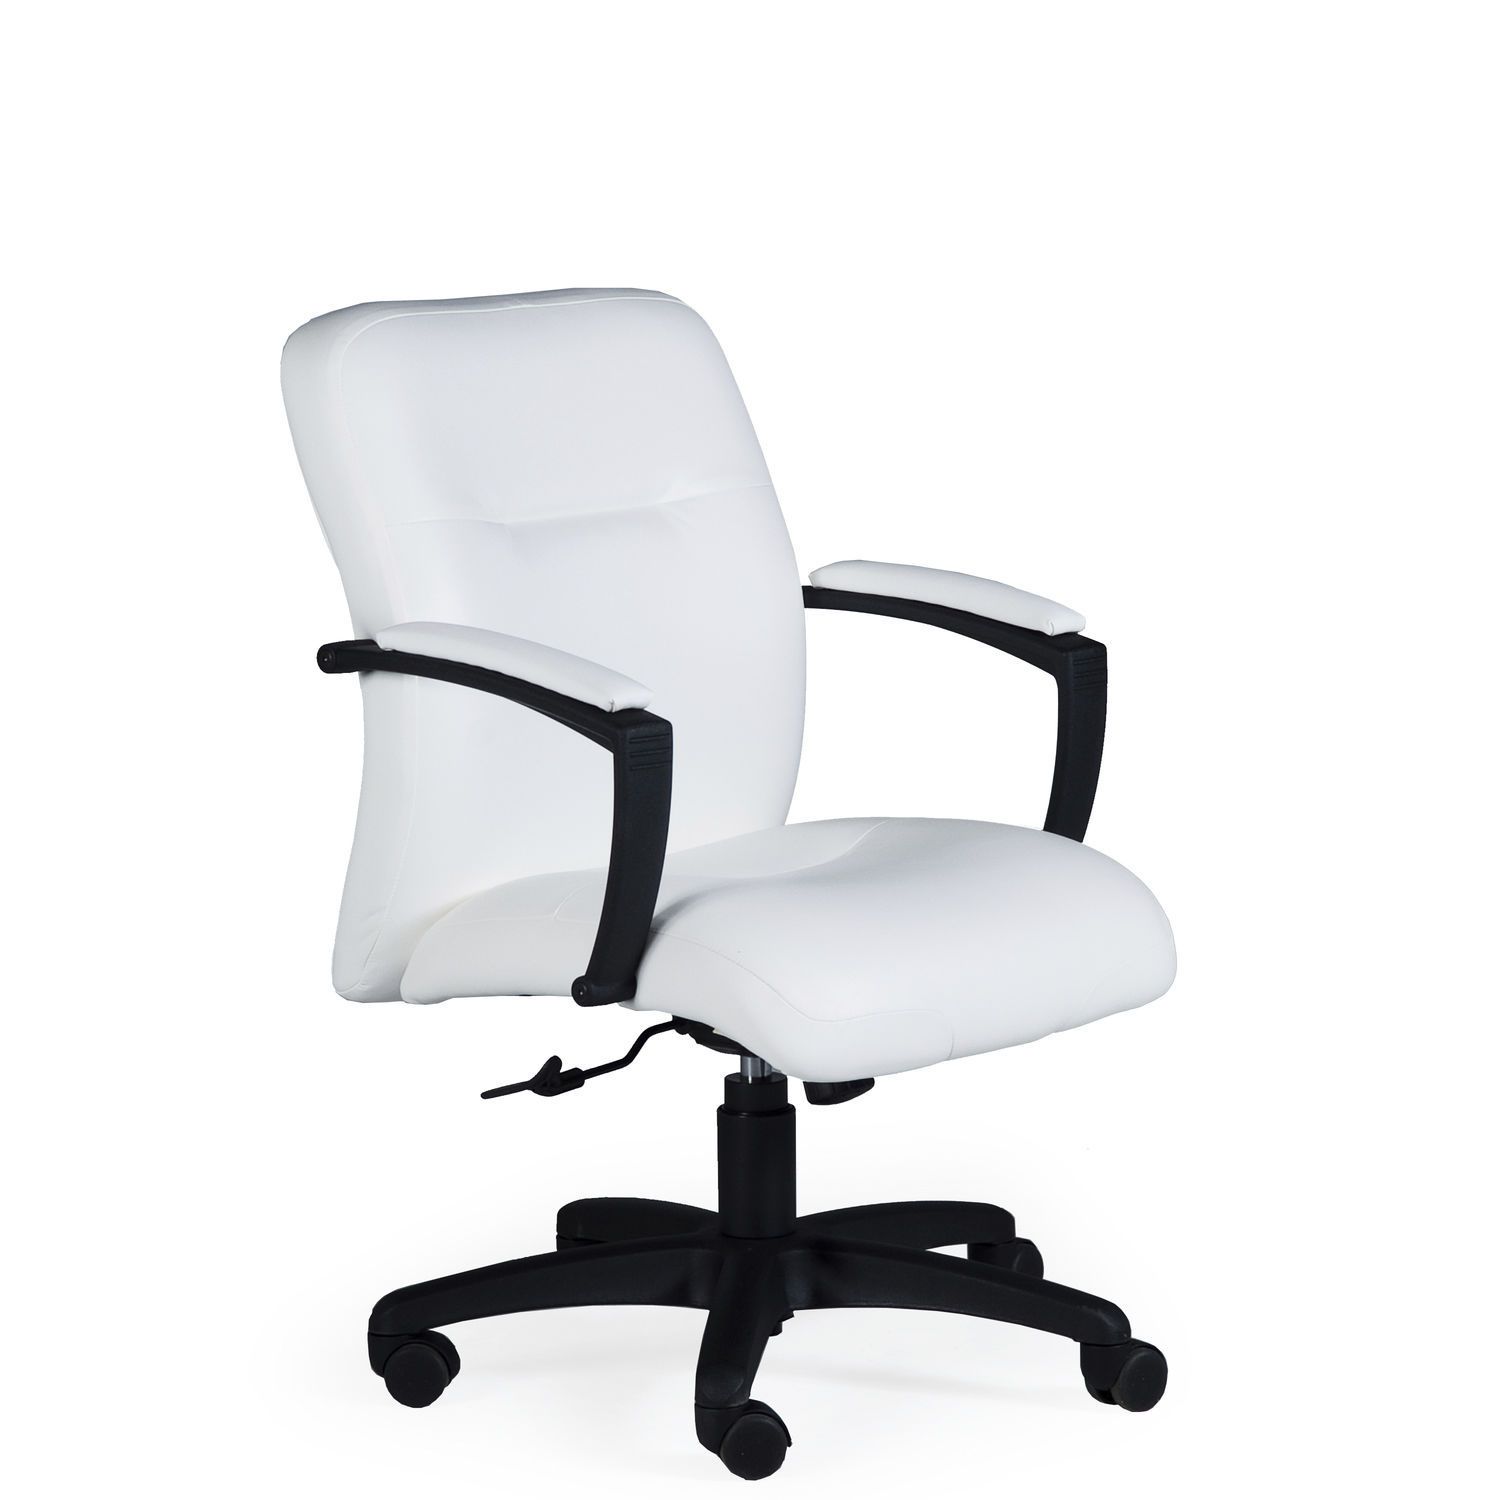 Office chair / executive / with armrests / on casters Majestic L9322 La-Z-Boy Contract Furniture